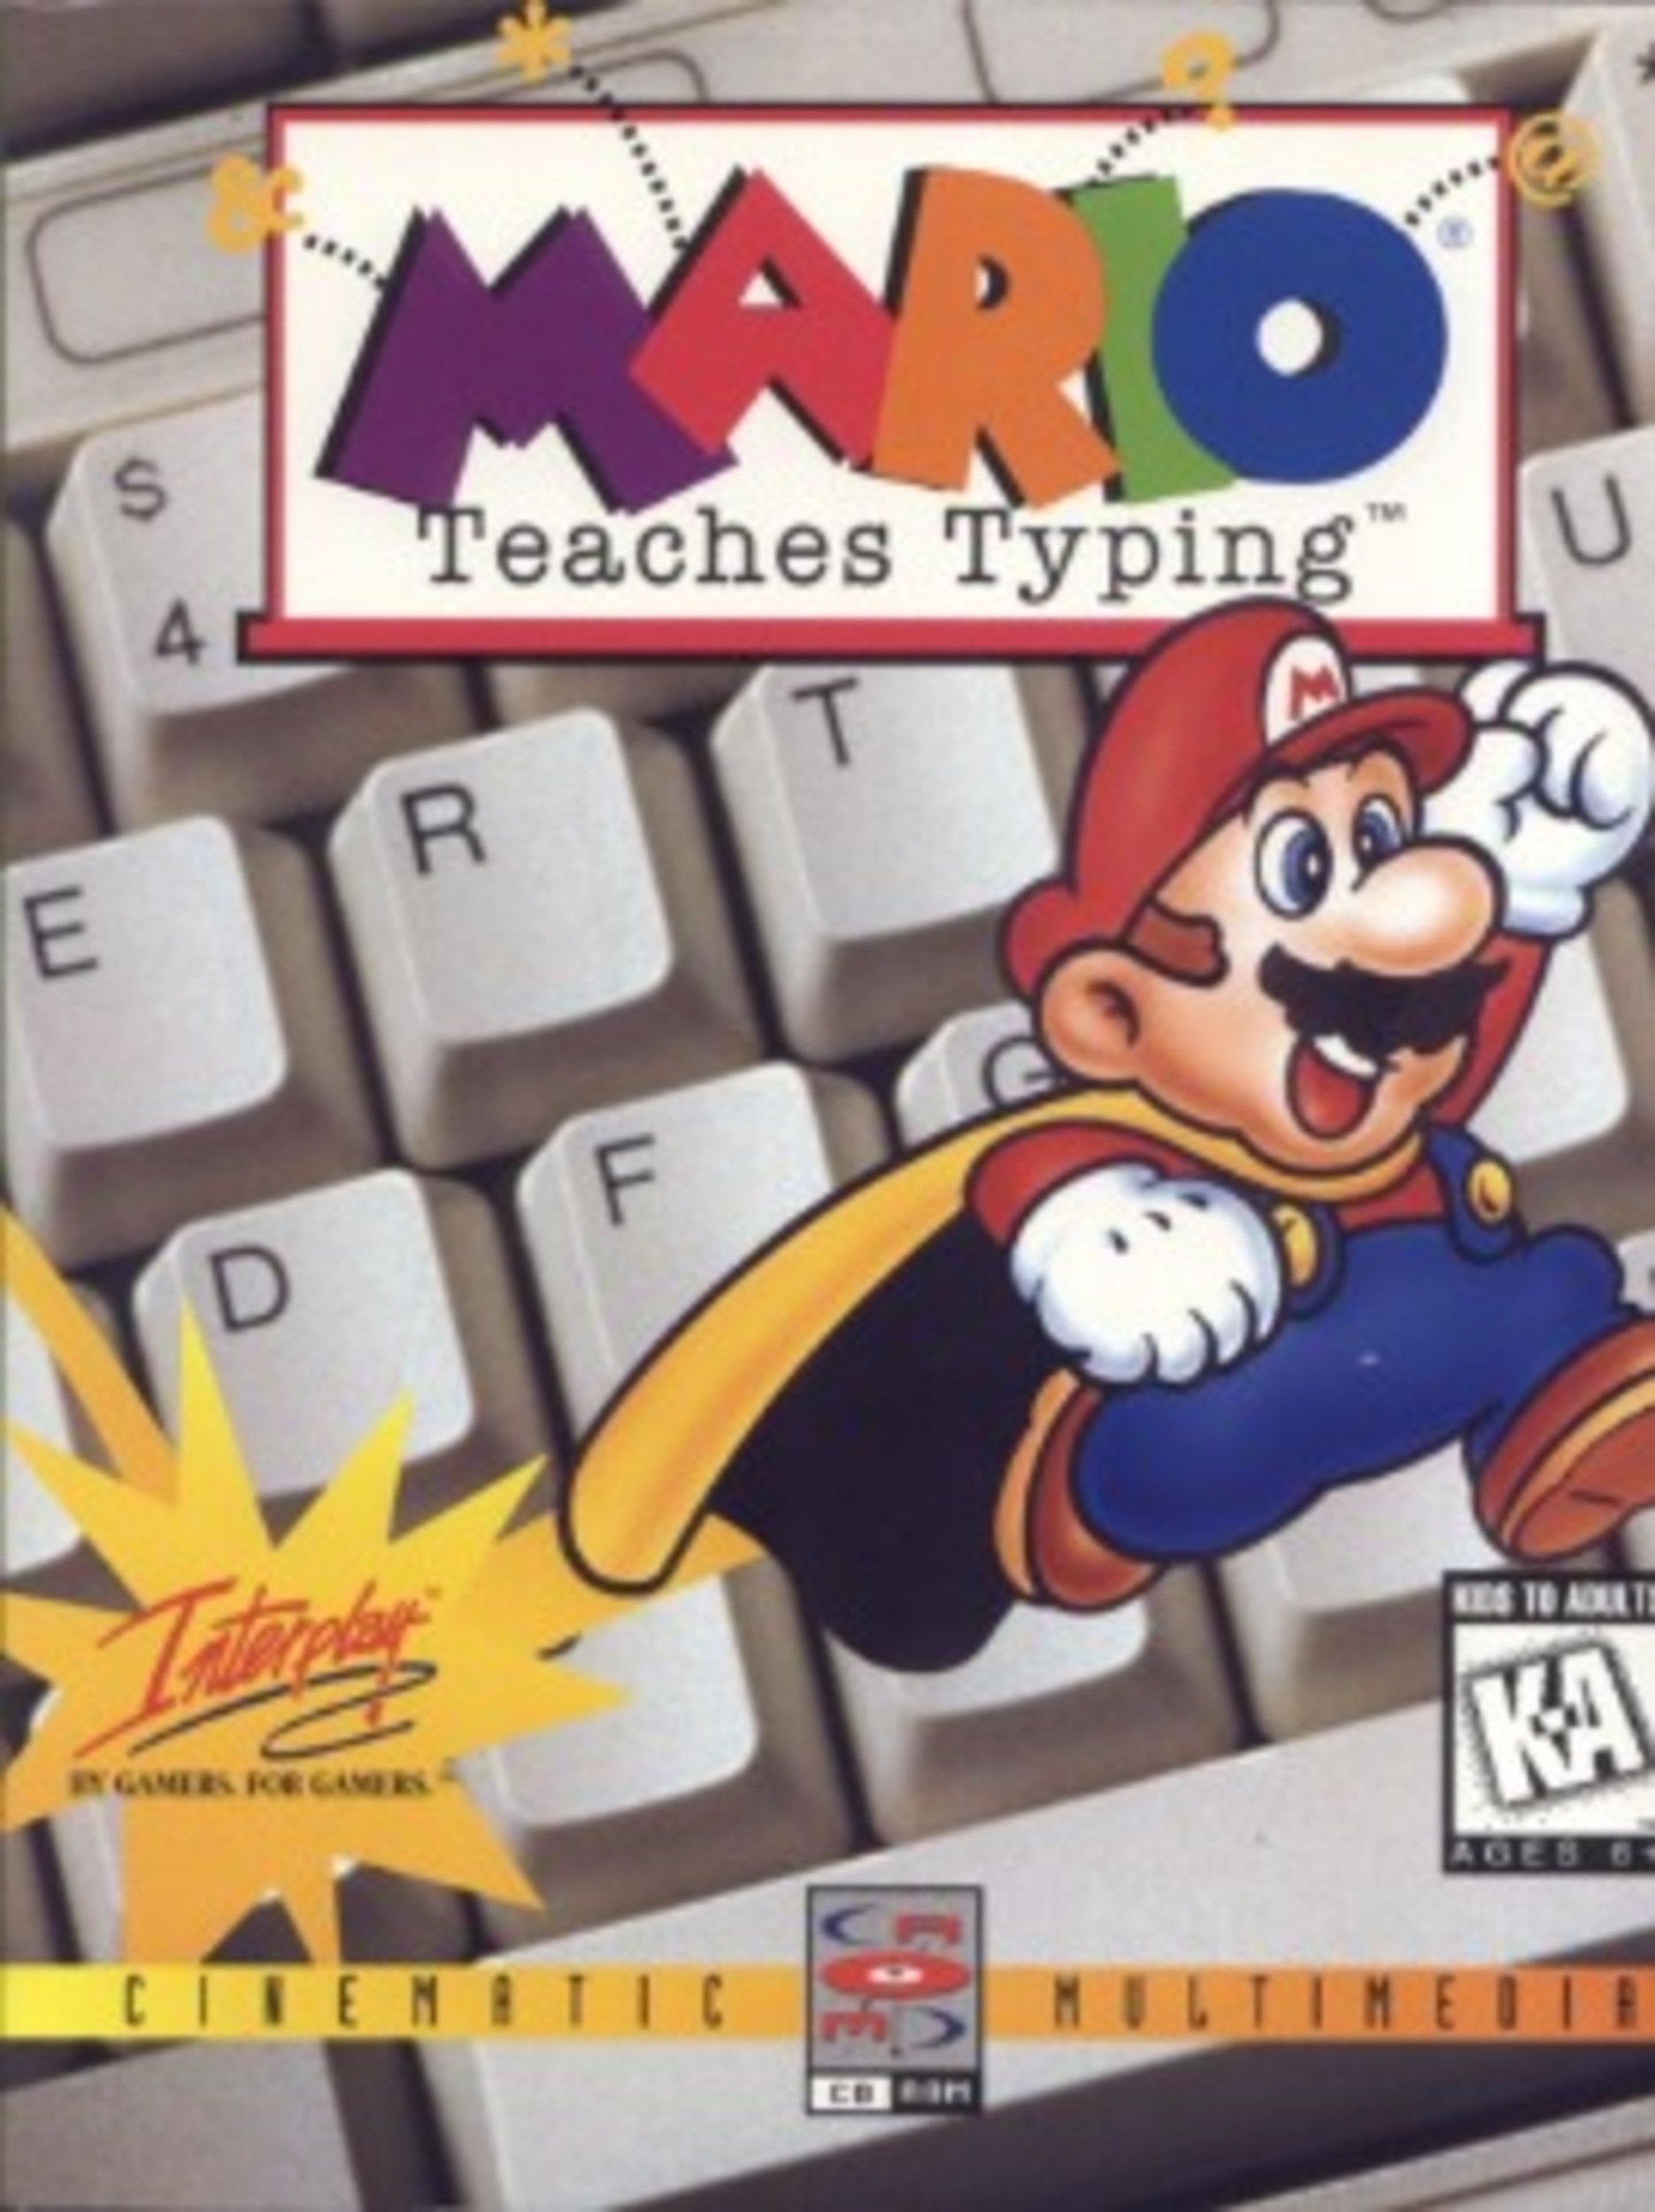 <p>To be fair, pretty much every major video game franchise of the '90s had a typing tutor spinoff for PC and/or Mac. It's not like today, where everyone owns a keyboard and learns how to type before they can speak. </p><p>However, <em>Mario Teaches Typing</em> barely works as an engaging tutor game. The formula is typing letters, numbers, punctuation marks, and words fast enough to make Mario, Luigi, or Princess Peach break blocks and avoid incoming enemies. The animations are wooden and move like a hand-drawn flipbook. The menu animations of a motion capture Mario look and sound like something out of one of David Lynch's nightmares. The worst part is how it reminds you that you're stuck at school and aren't home where you could play a much better Mario game.</p><p>You may also like: <a href='https://www.yardbarker.com/entertainment/articles/the_25_best_car_chases_in_movie_history_040624/s1__36324920'>The 25 best car chases in movie history</a></p>